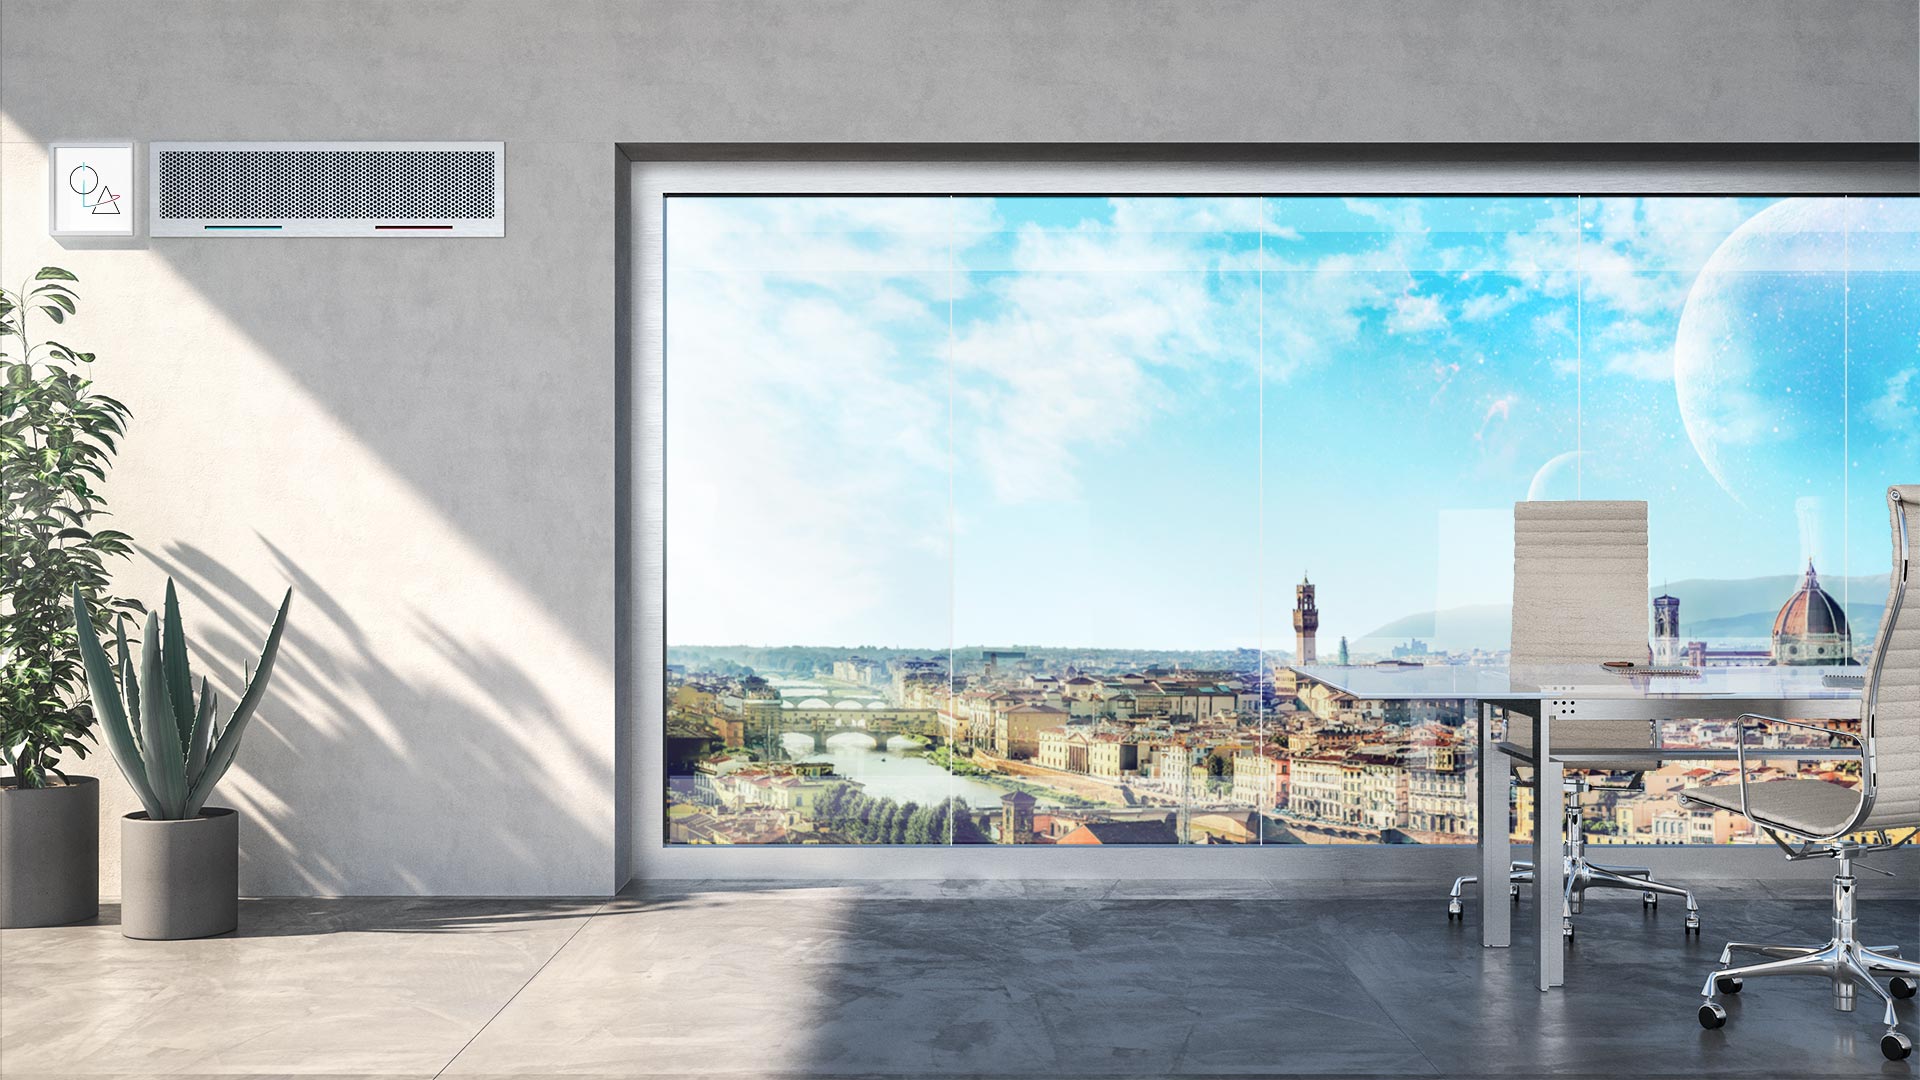 Image of an office room with a window on a city of the future. In the room there is an air conditioner to express the idea of sanitation through ventilation and air conditioning systems.